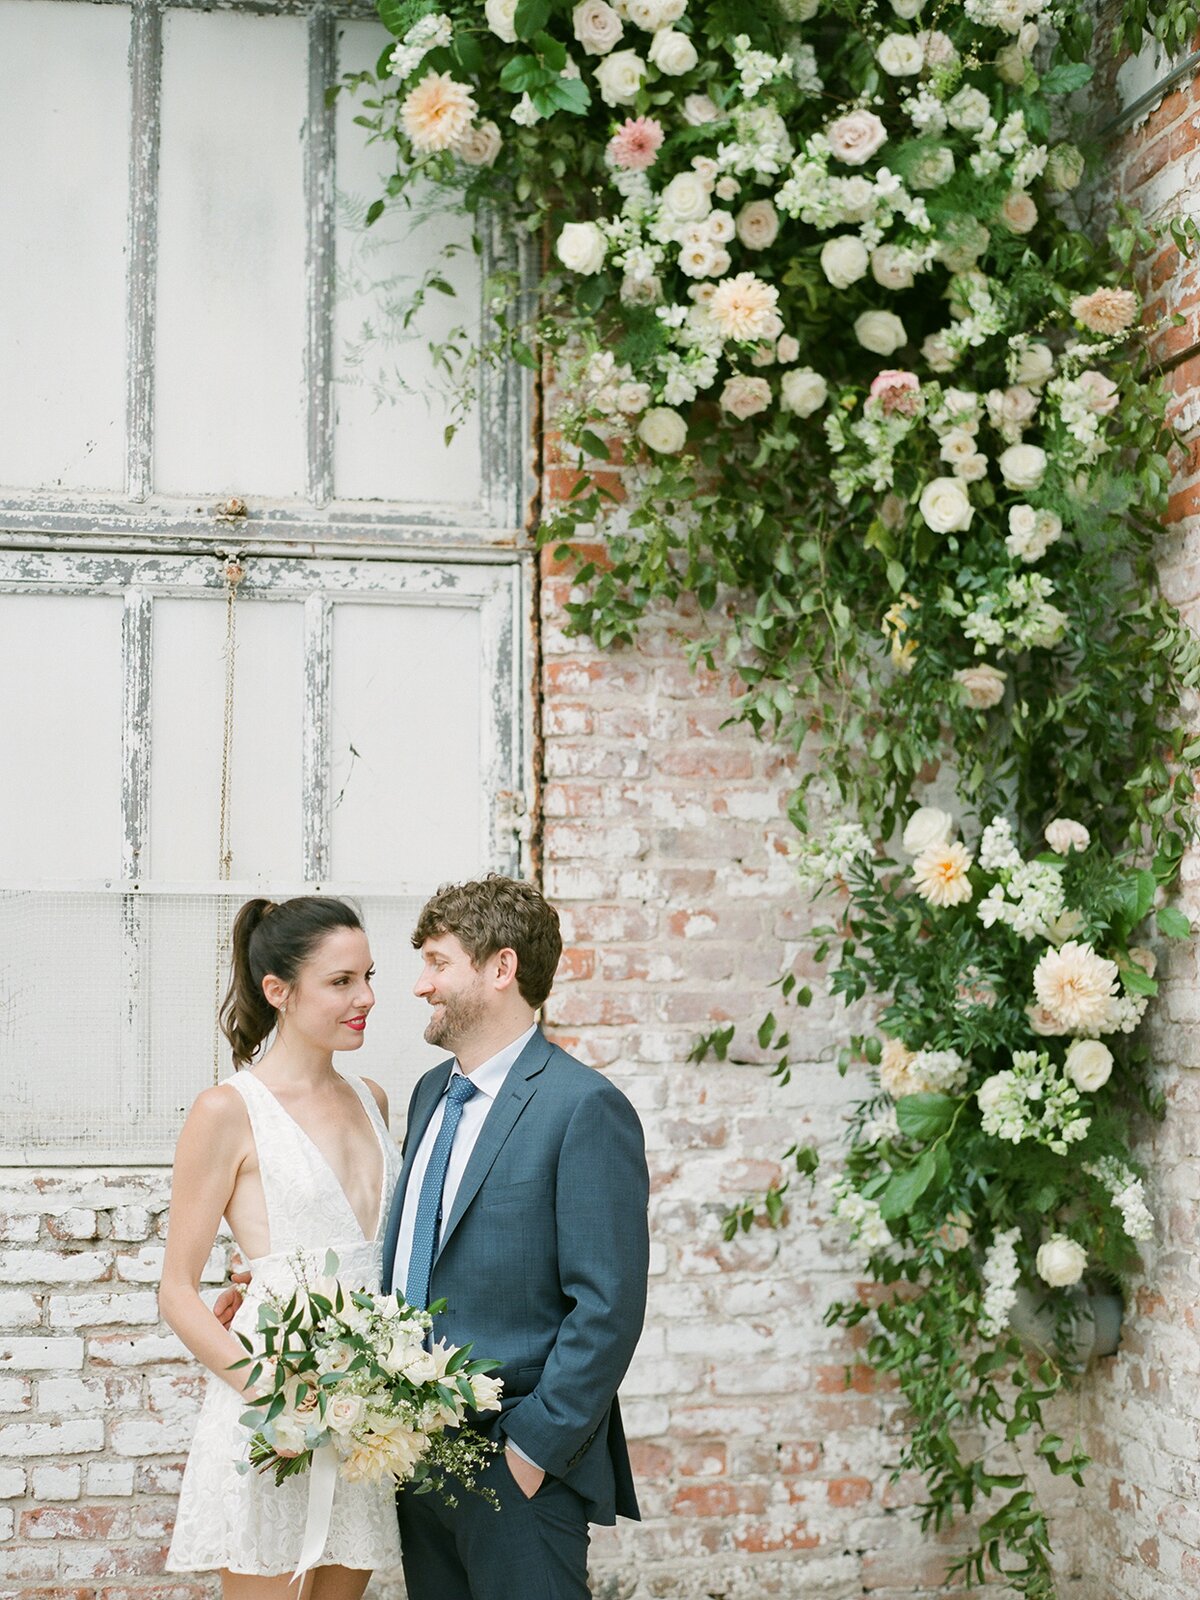 Happy couple standing in front of brick wall with floral garden background